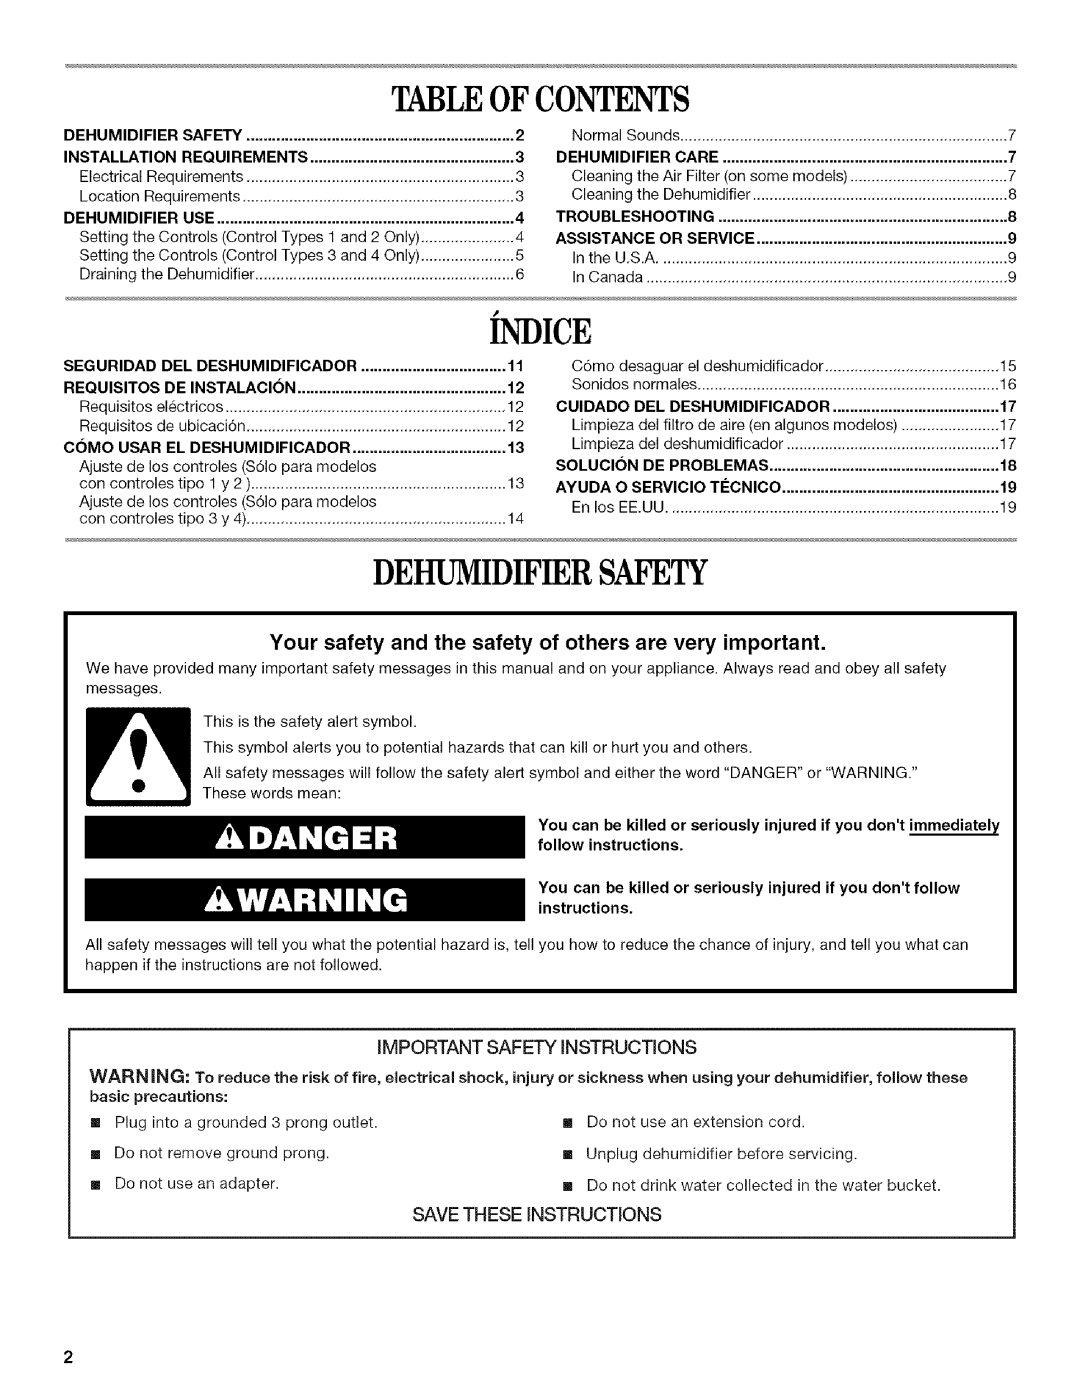 Whirlpool AD25B manual Tableof Contents, Indice, Dehumidifiersafety, iMPORTANT SAFETY iNSTRUCTiONS, SAVE THESE iNSTRUCTiONS 